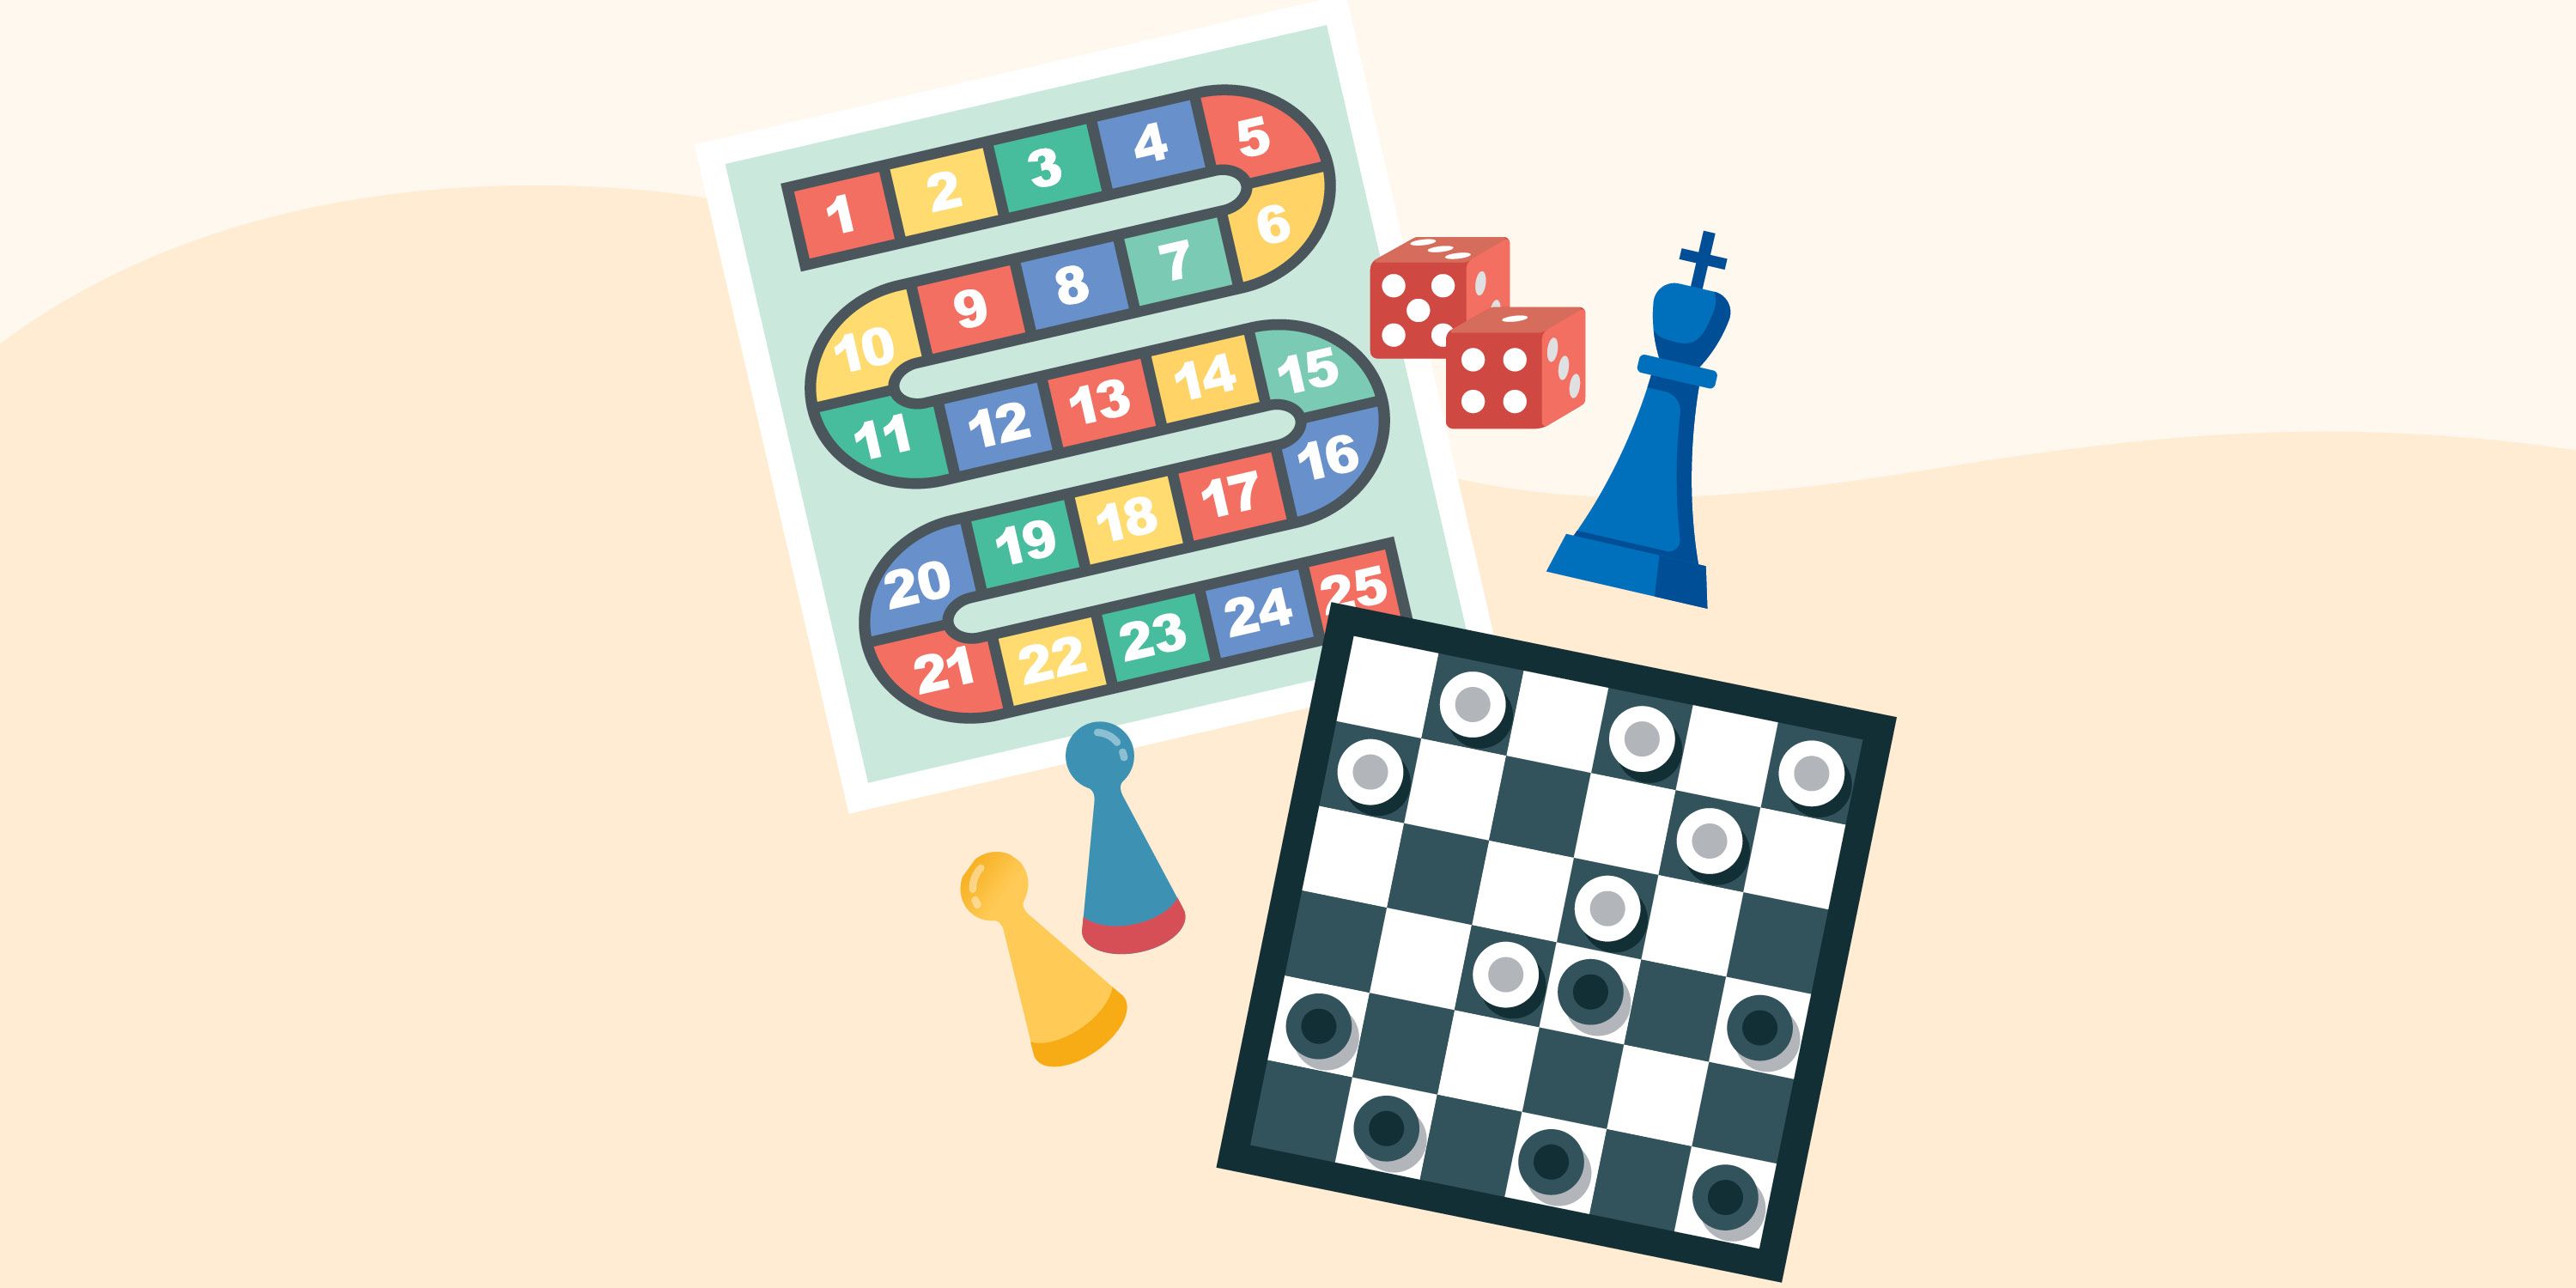 Board games for families